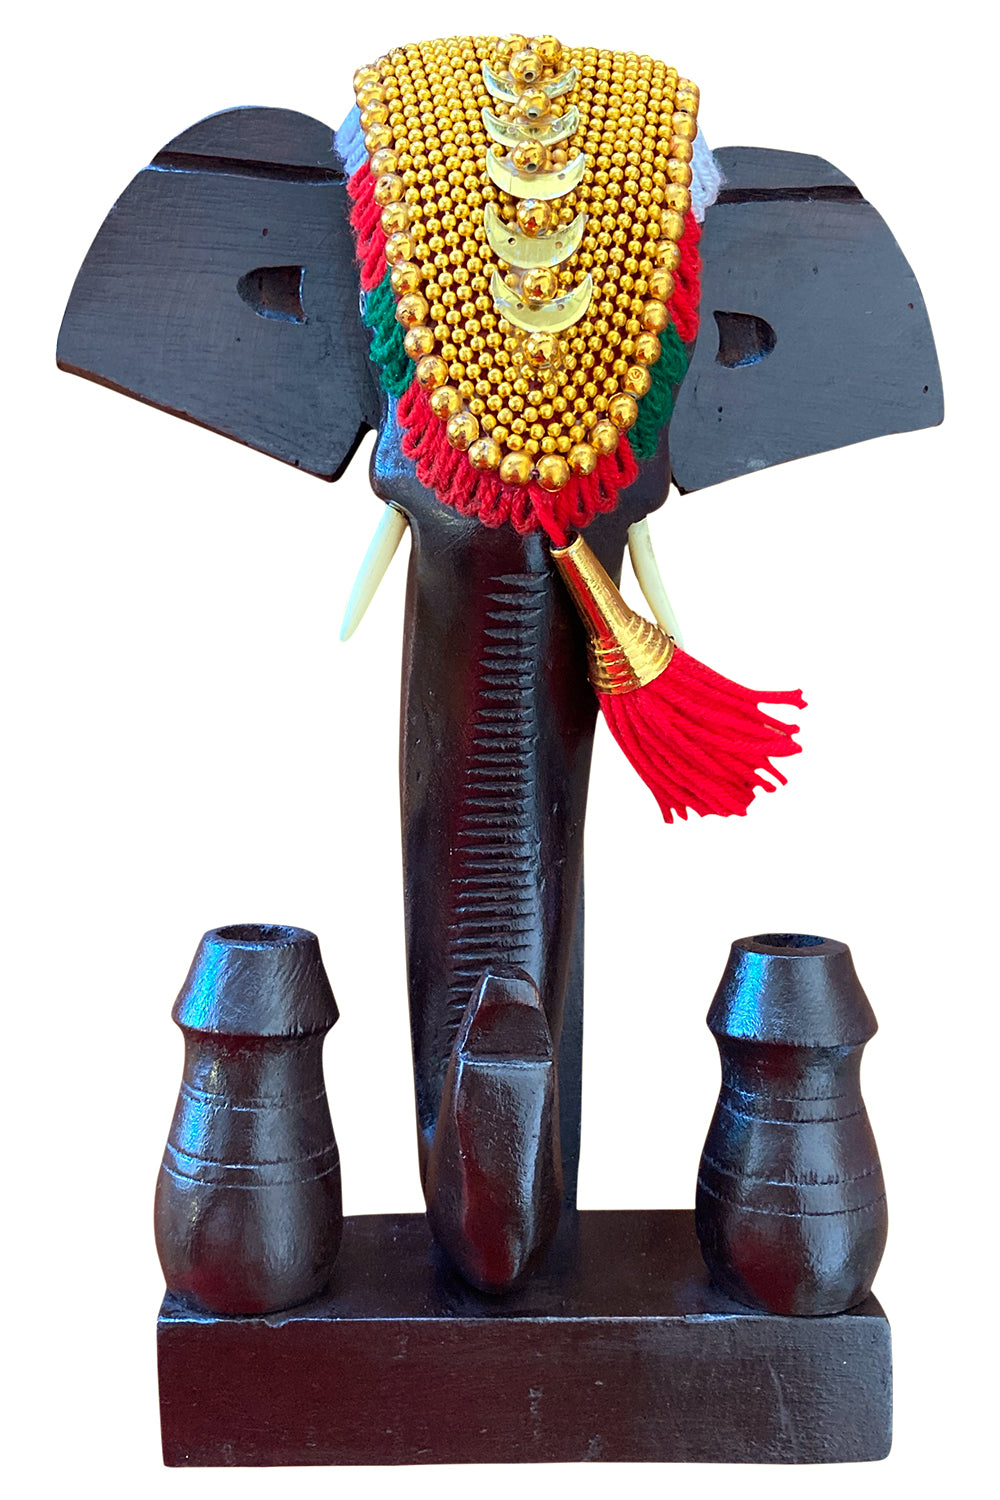 Southloom Handmade Temple Elephant Head with Pen Holder Handicraft 10 inches (Carved from Mahogany Wood)